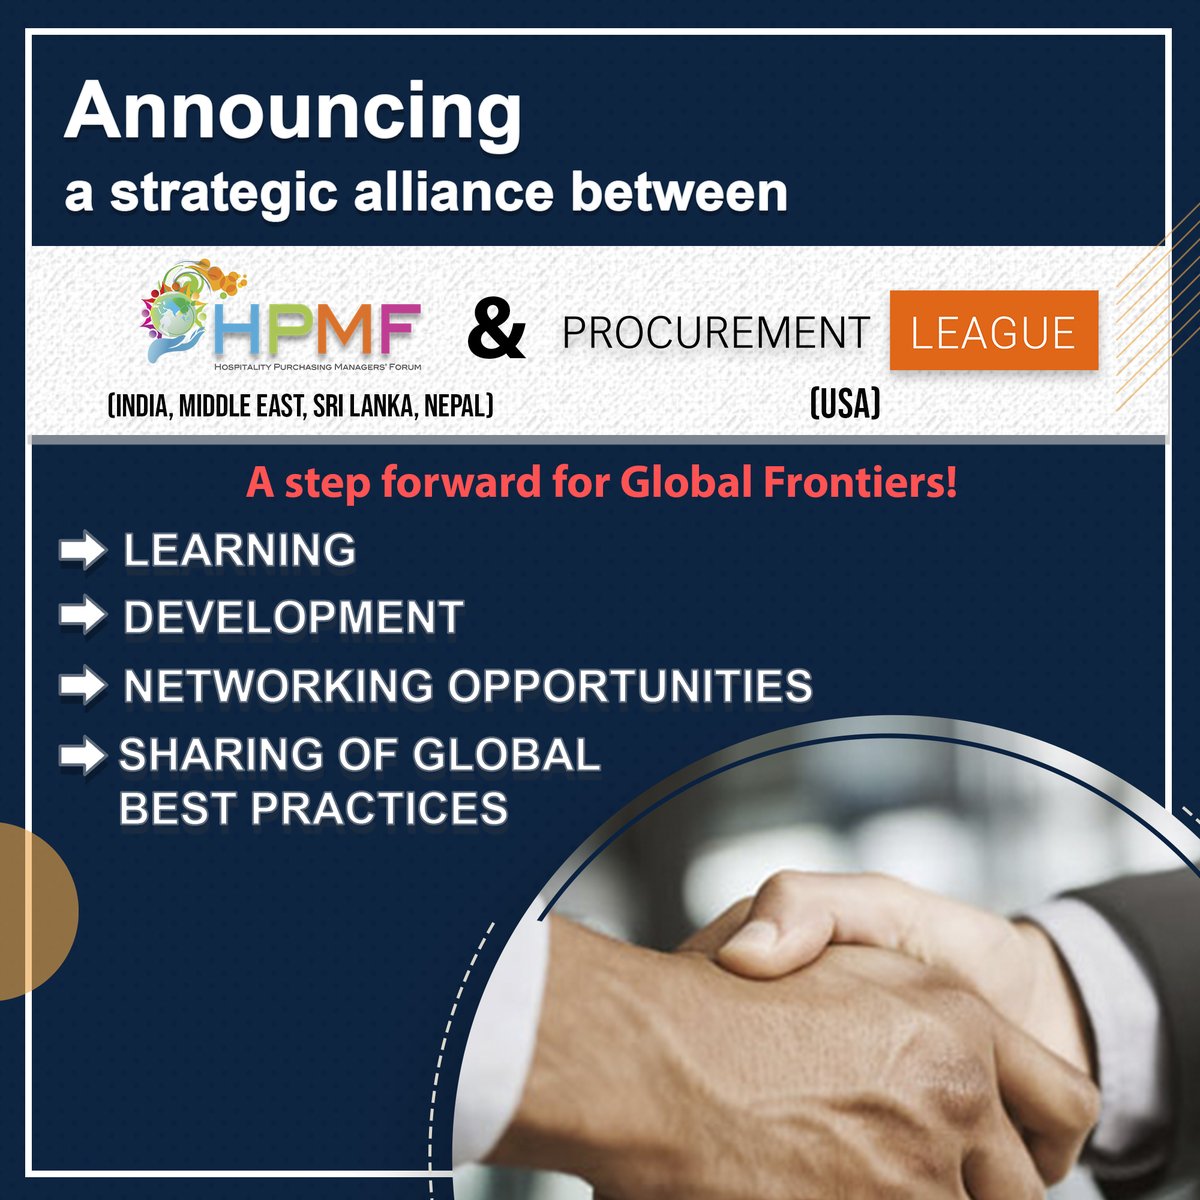 HPMF greatly values collaboration and dynamic dialogue as one of the ways to continually expand our worldview. We pleased to announce an International collaboration with PROCUREMENT LEAGUE, USA which will enhance our exposure, education and research programmes.